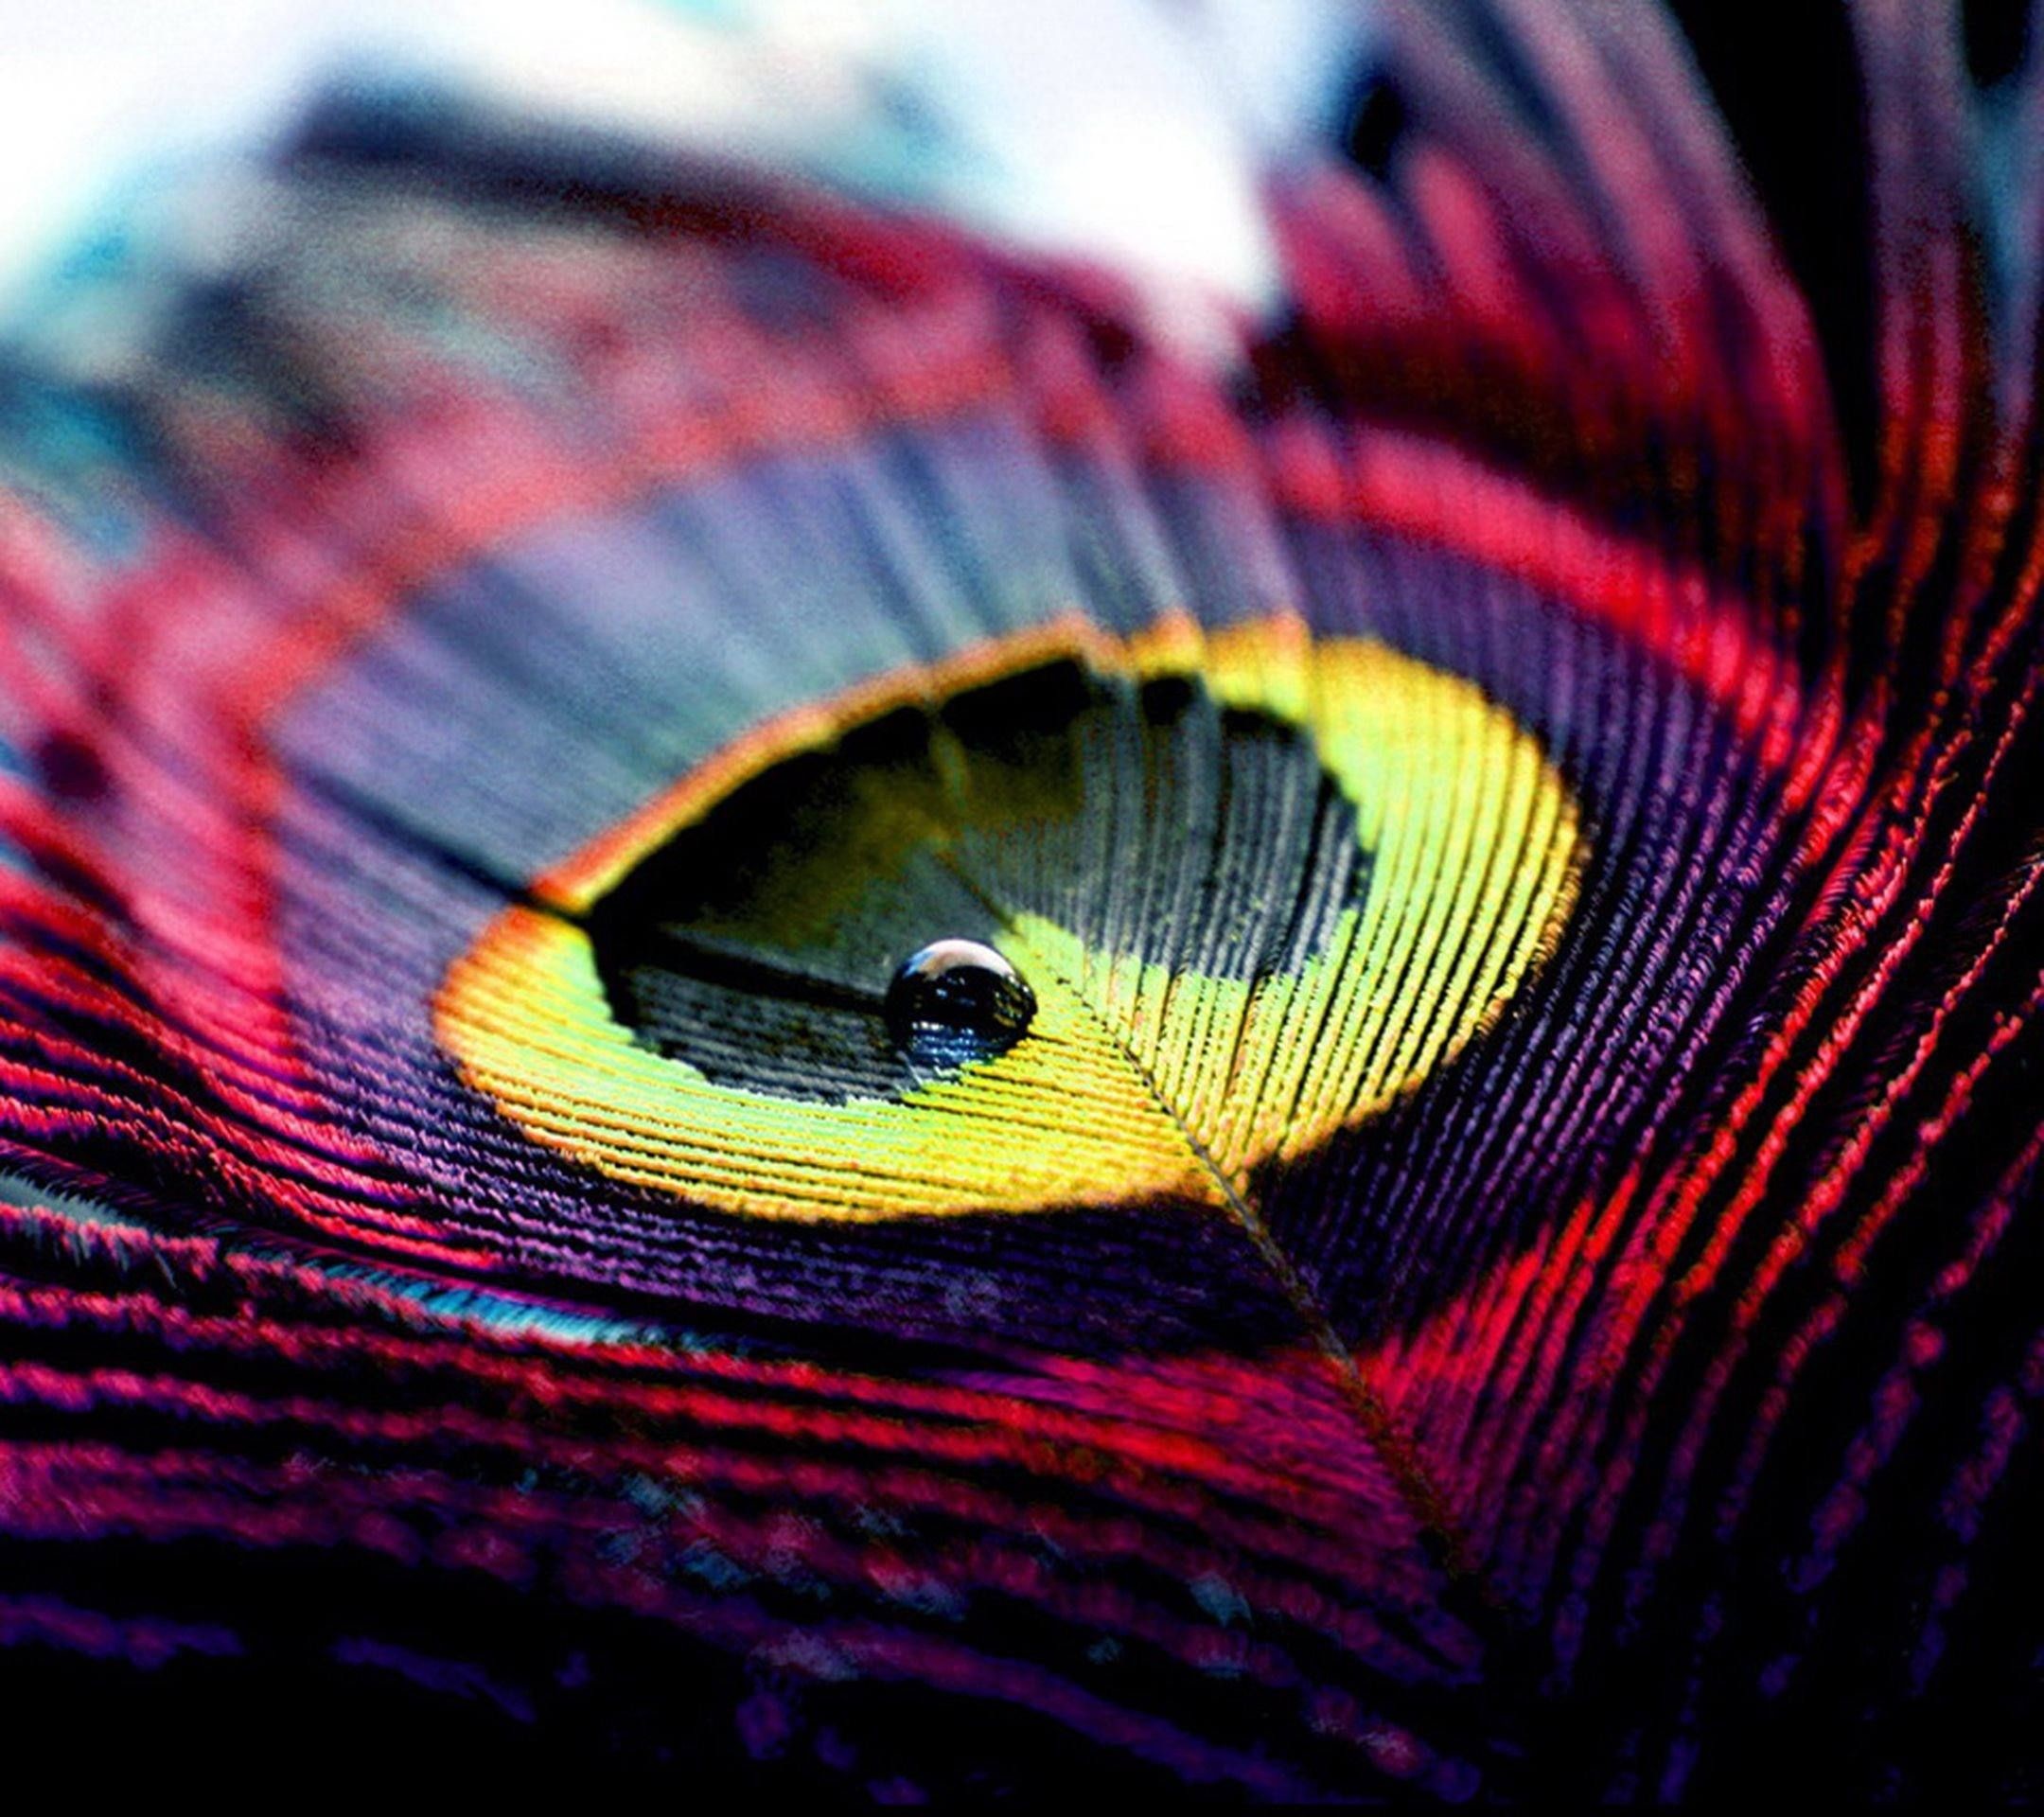 2160x1920, Single Peacock Feathers Wallpaper - Peacock Feather